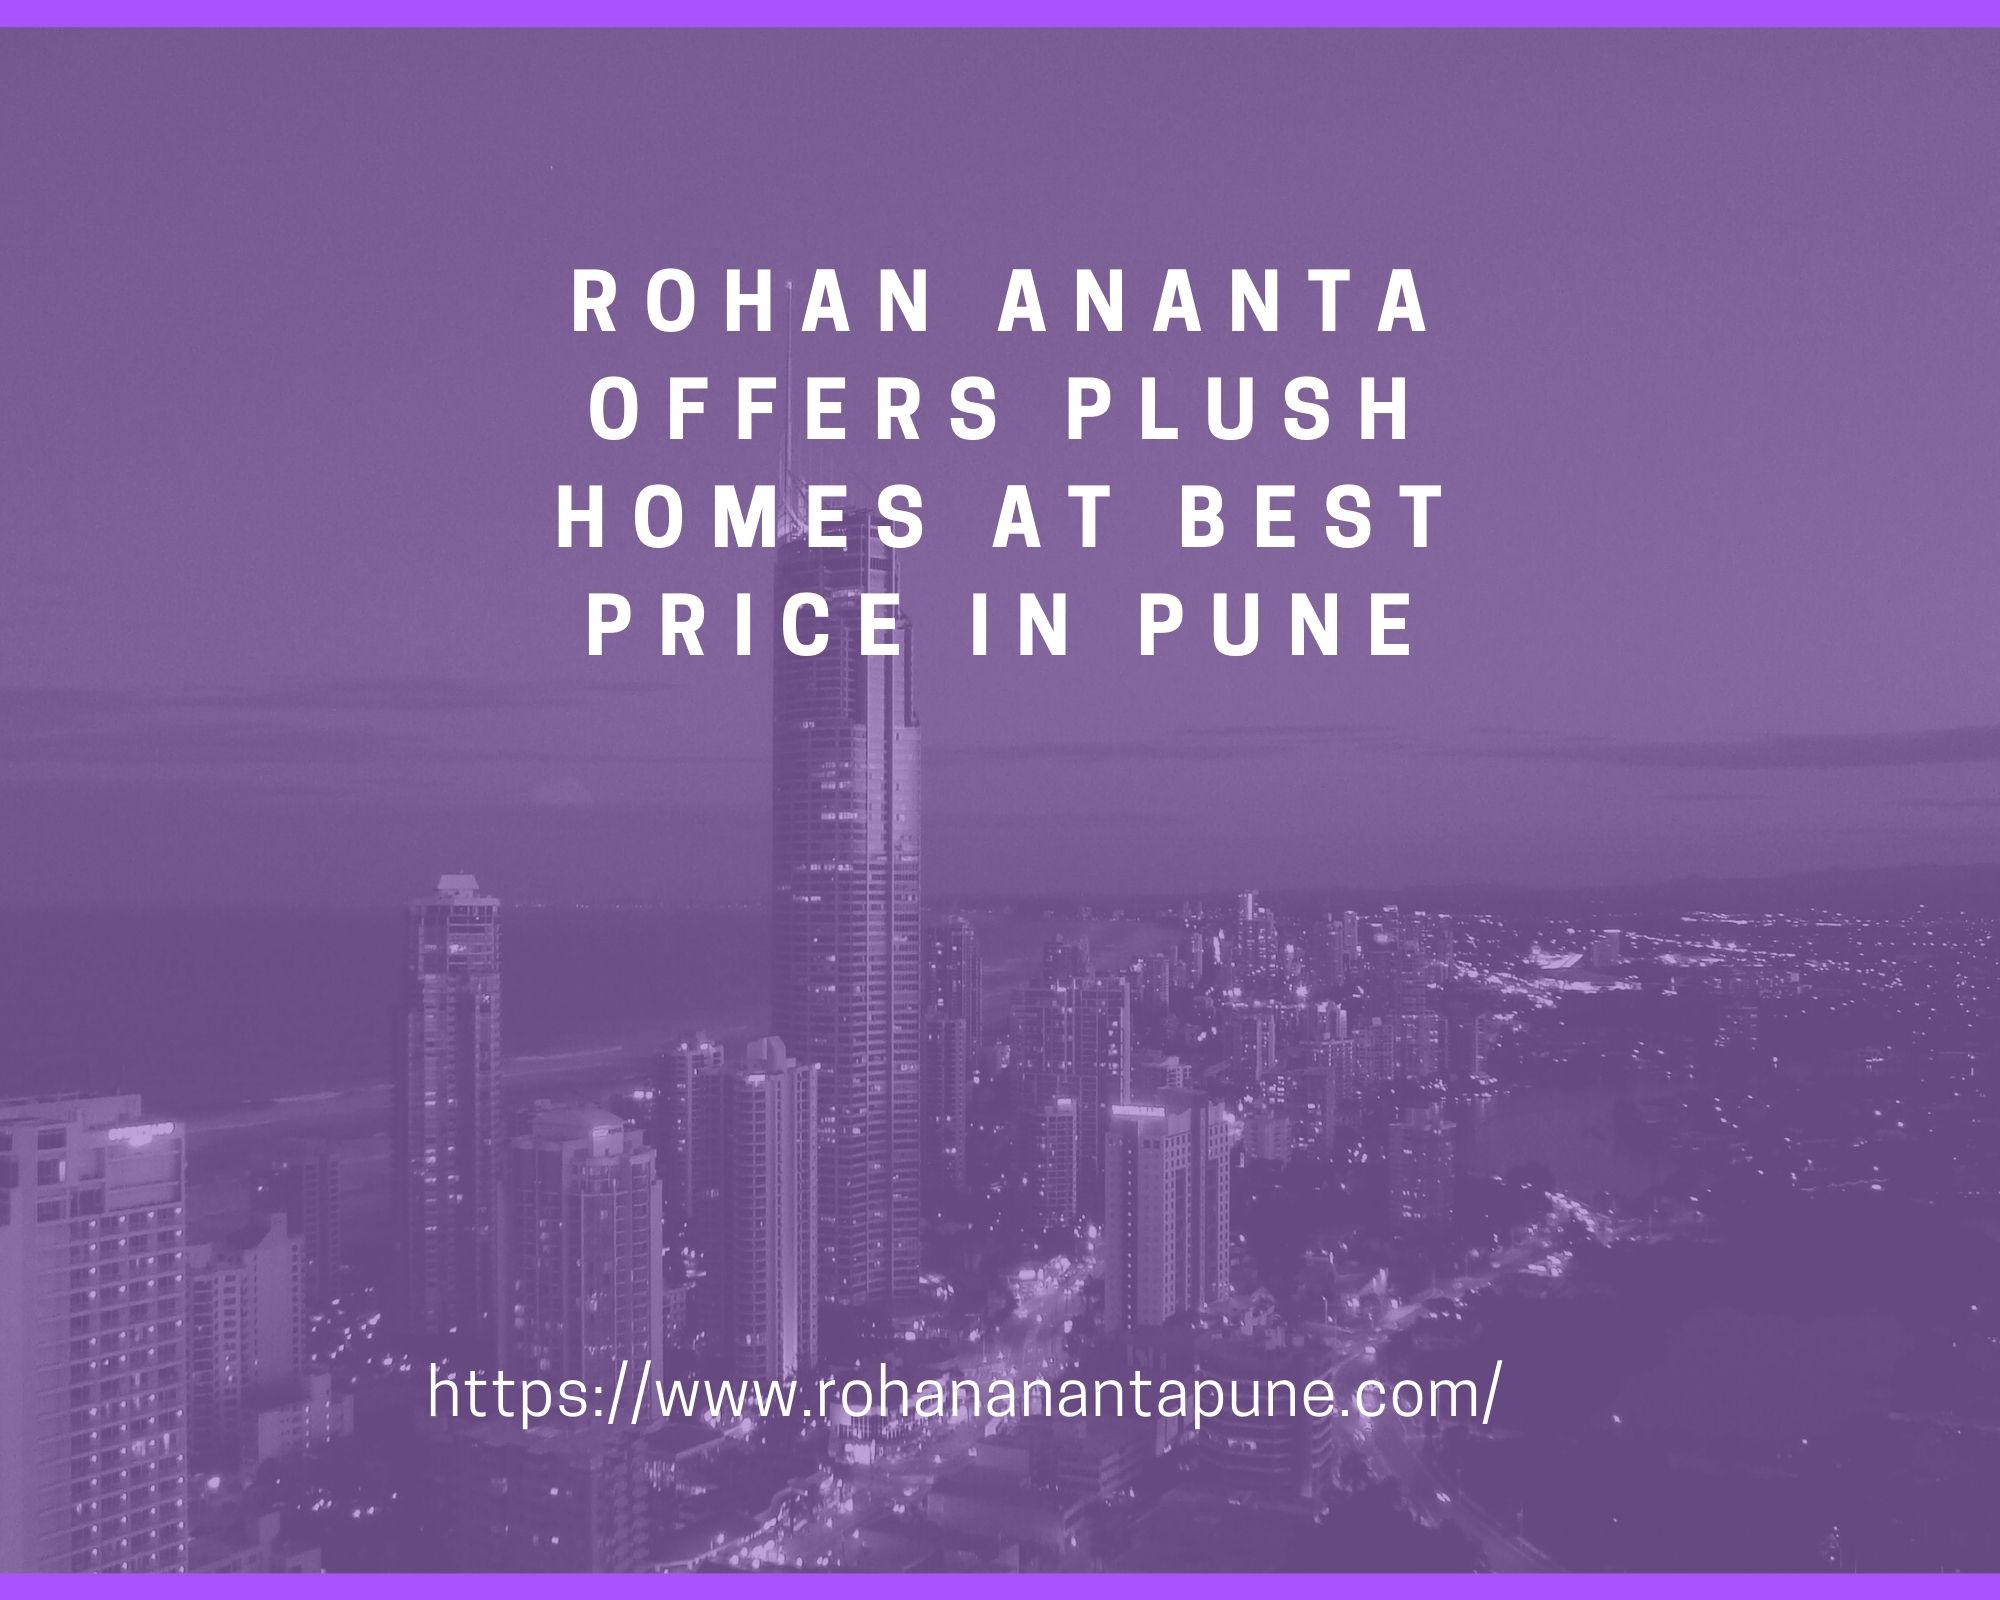 Rohan Ananta offers plush homes at best price in Pune